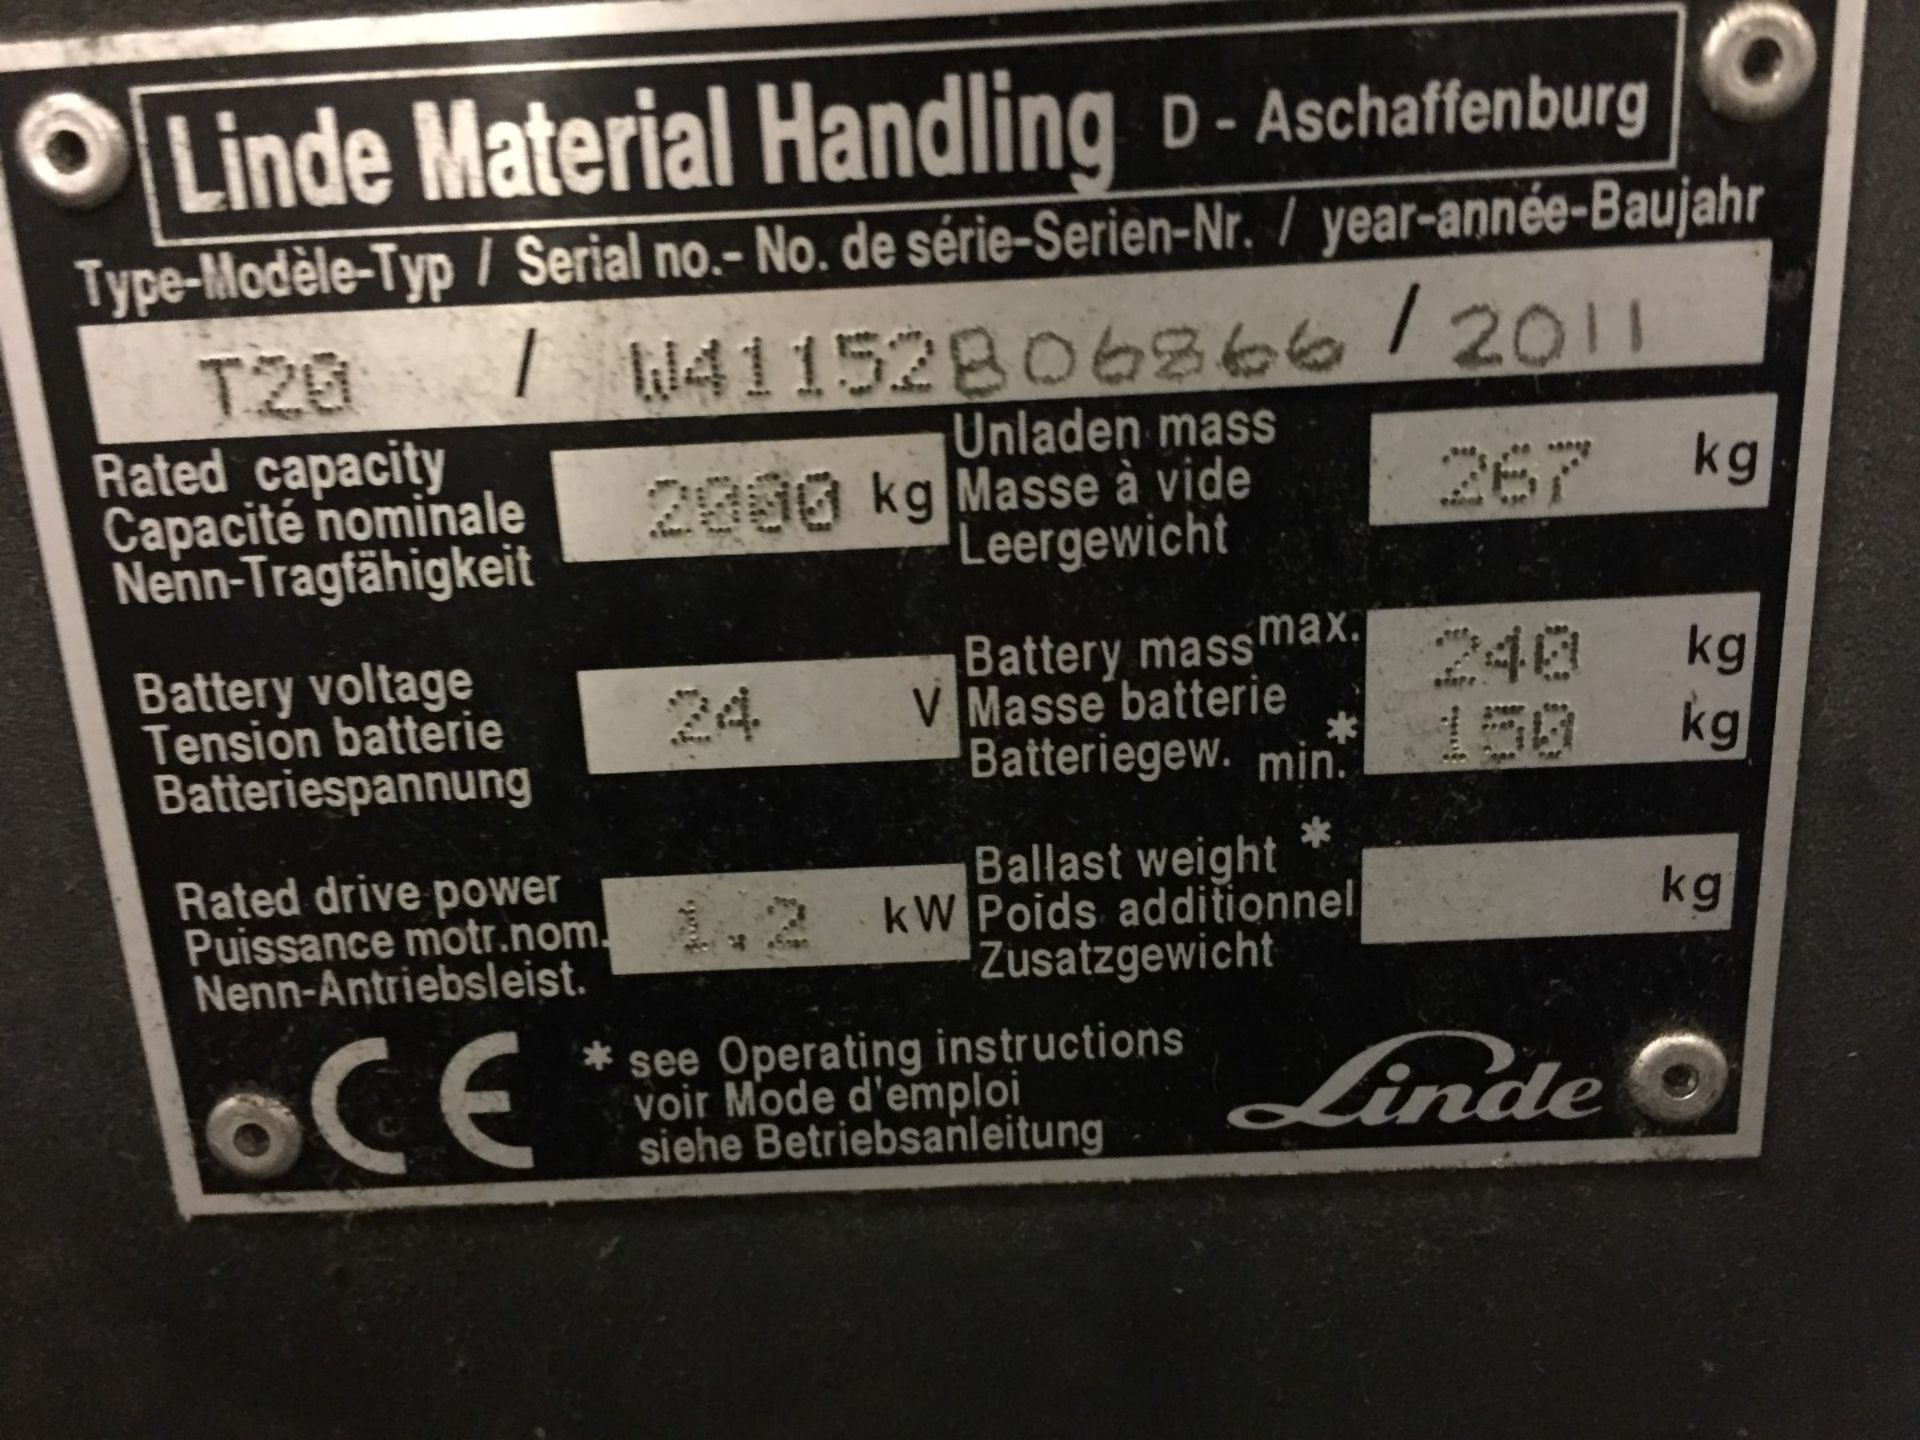 1 x Linde T20 Electric Pallet Truck - Tested and Working - Charger Included - CL007 - Ref: T20/1 - - Image 9 of 12